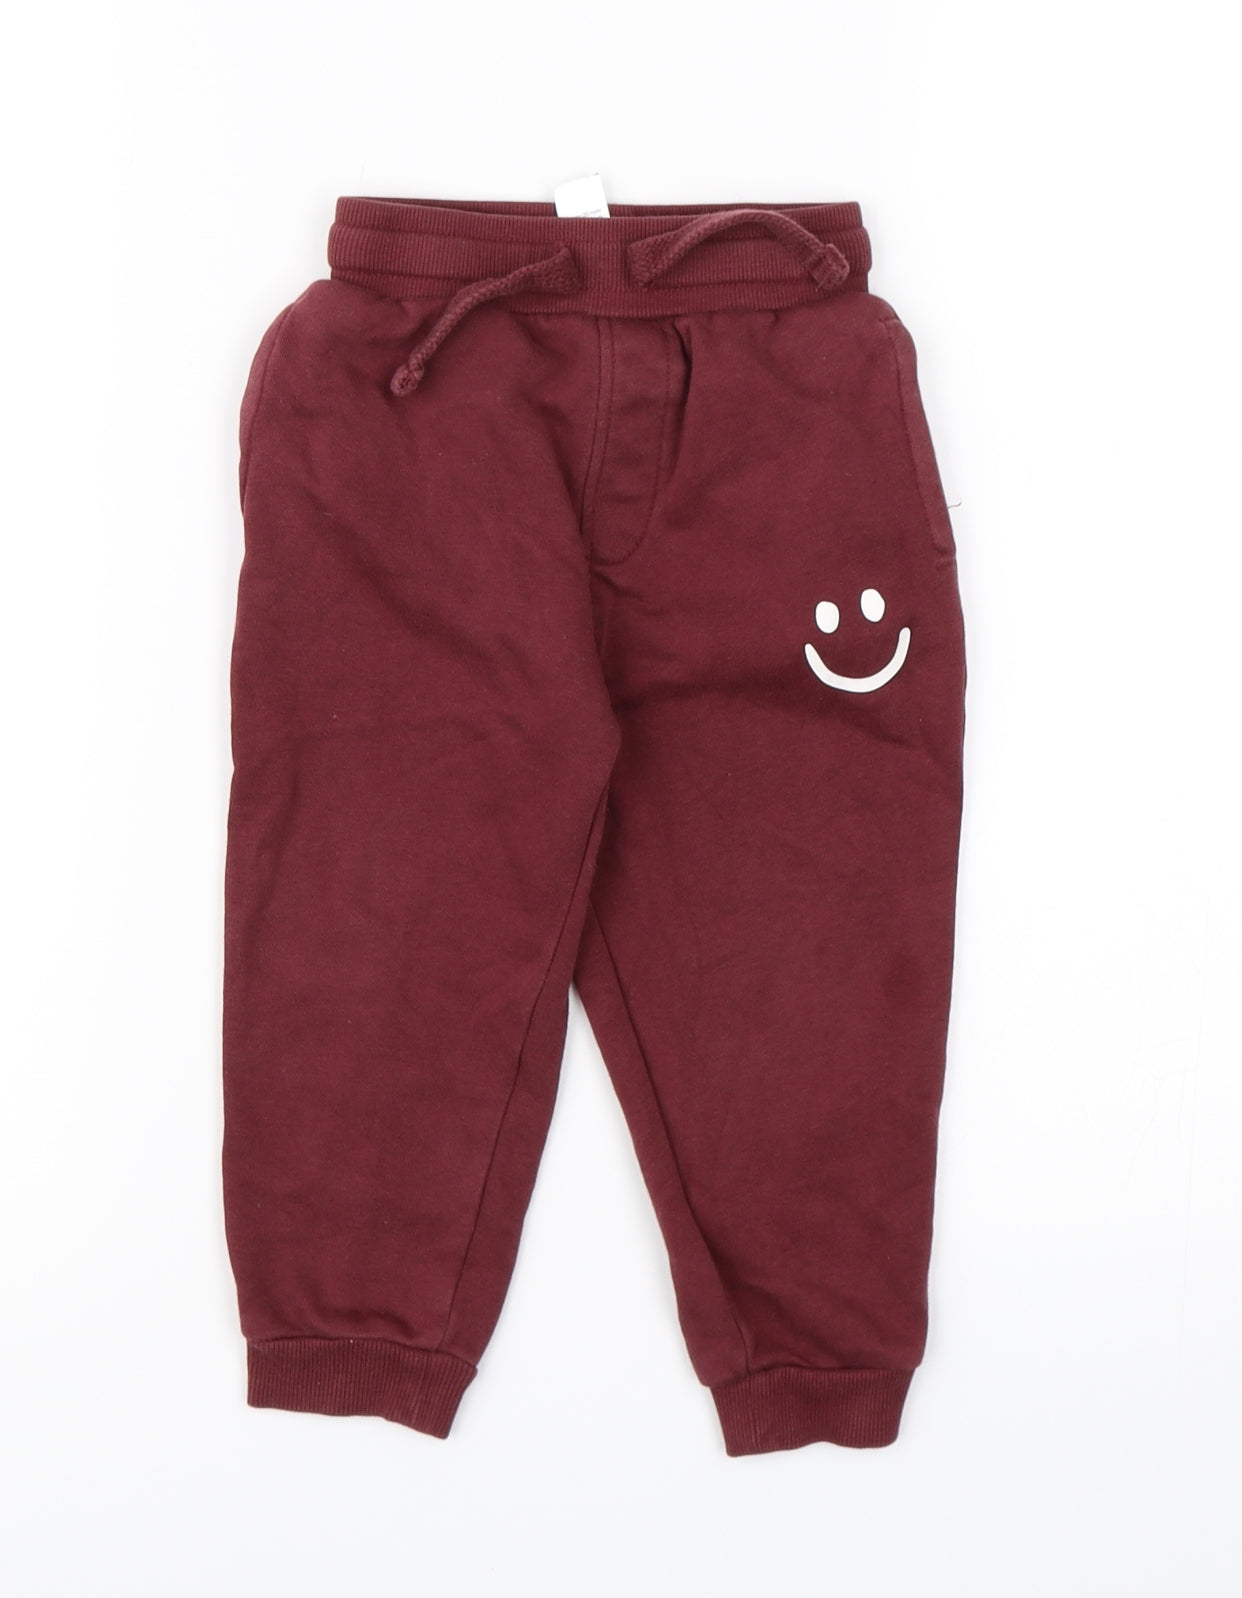 George Boys Brown  Jersey Jogger Trousers Size 18-24 Months